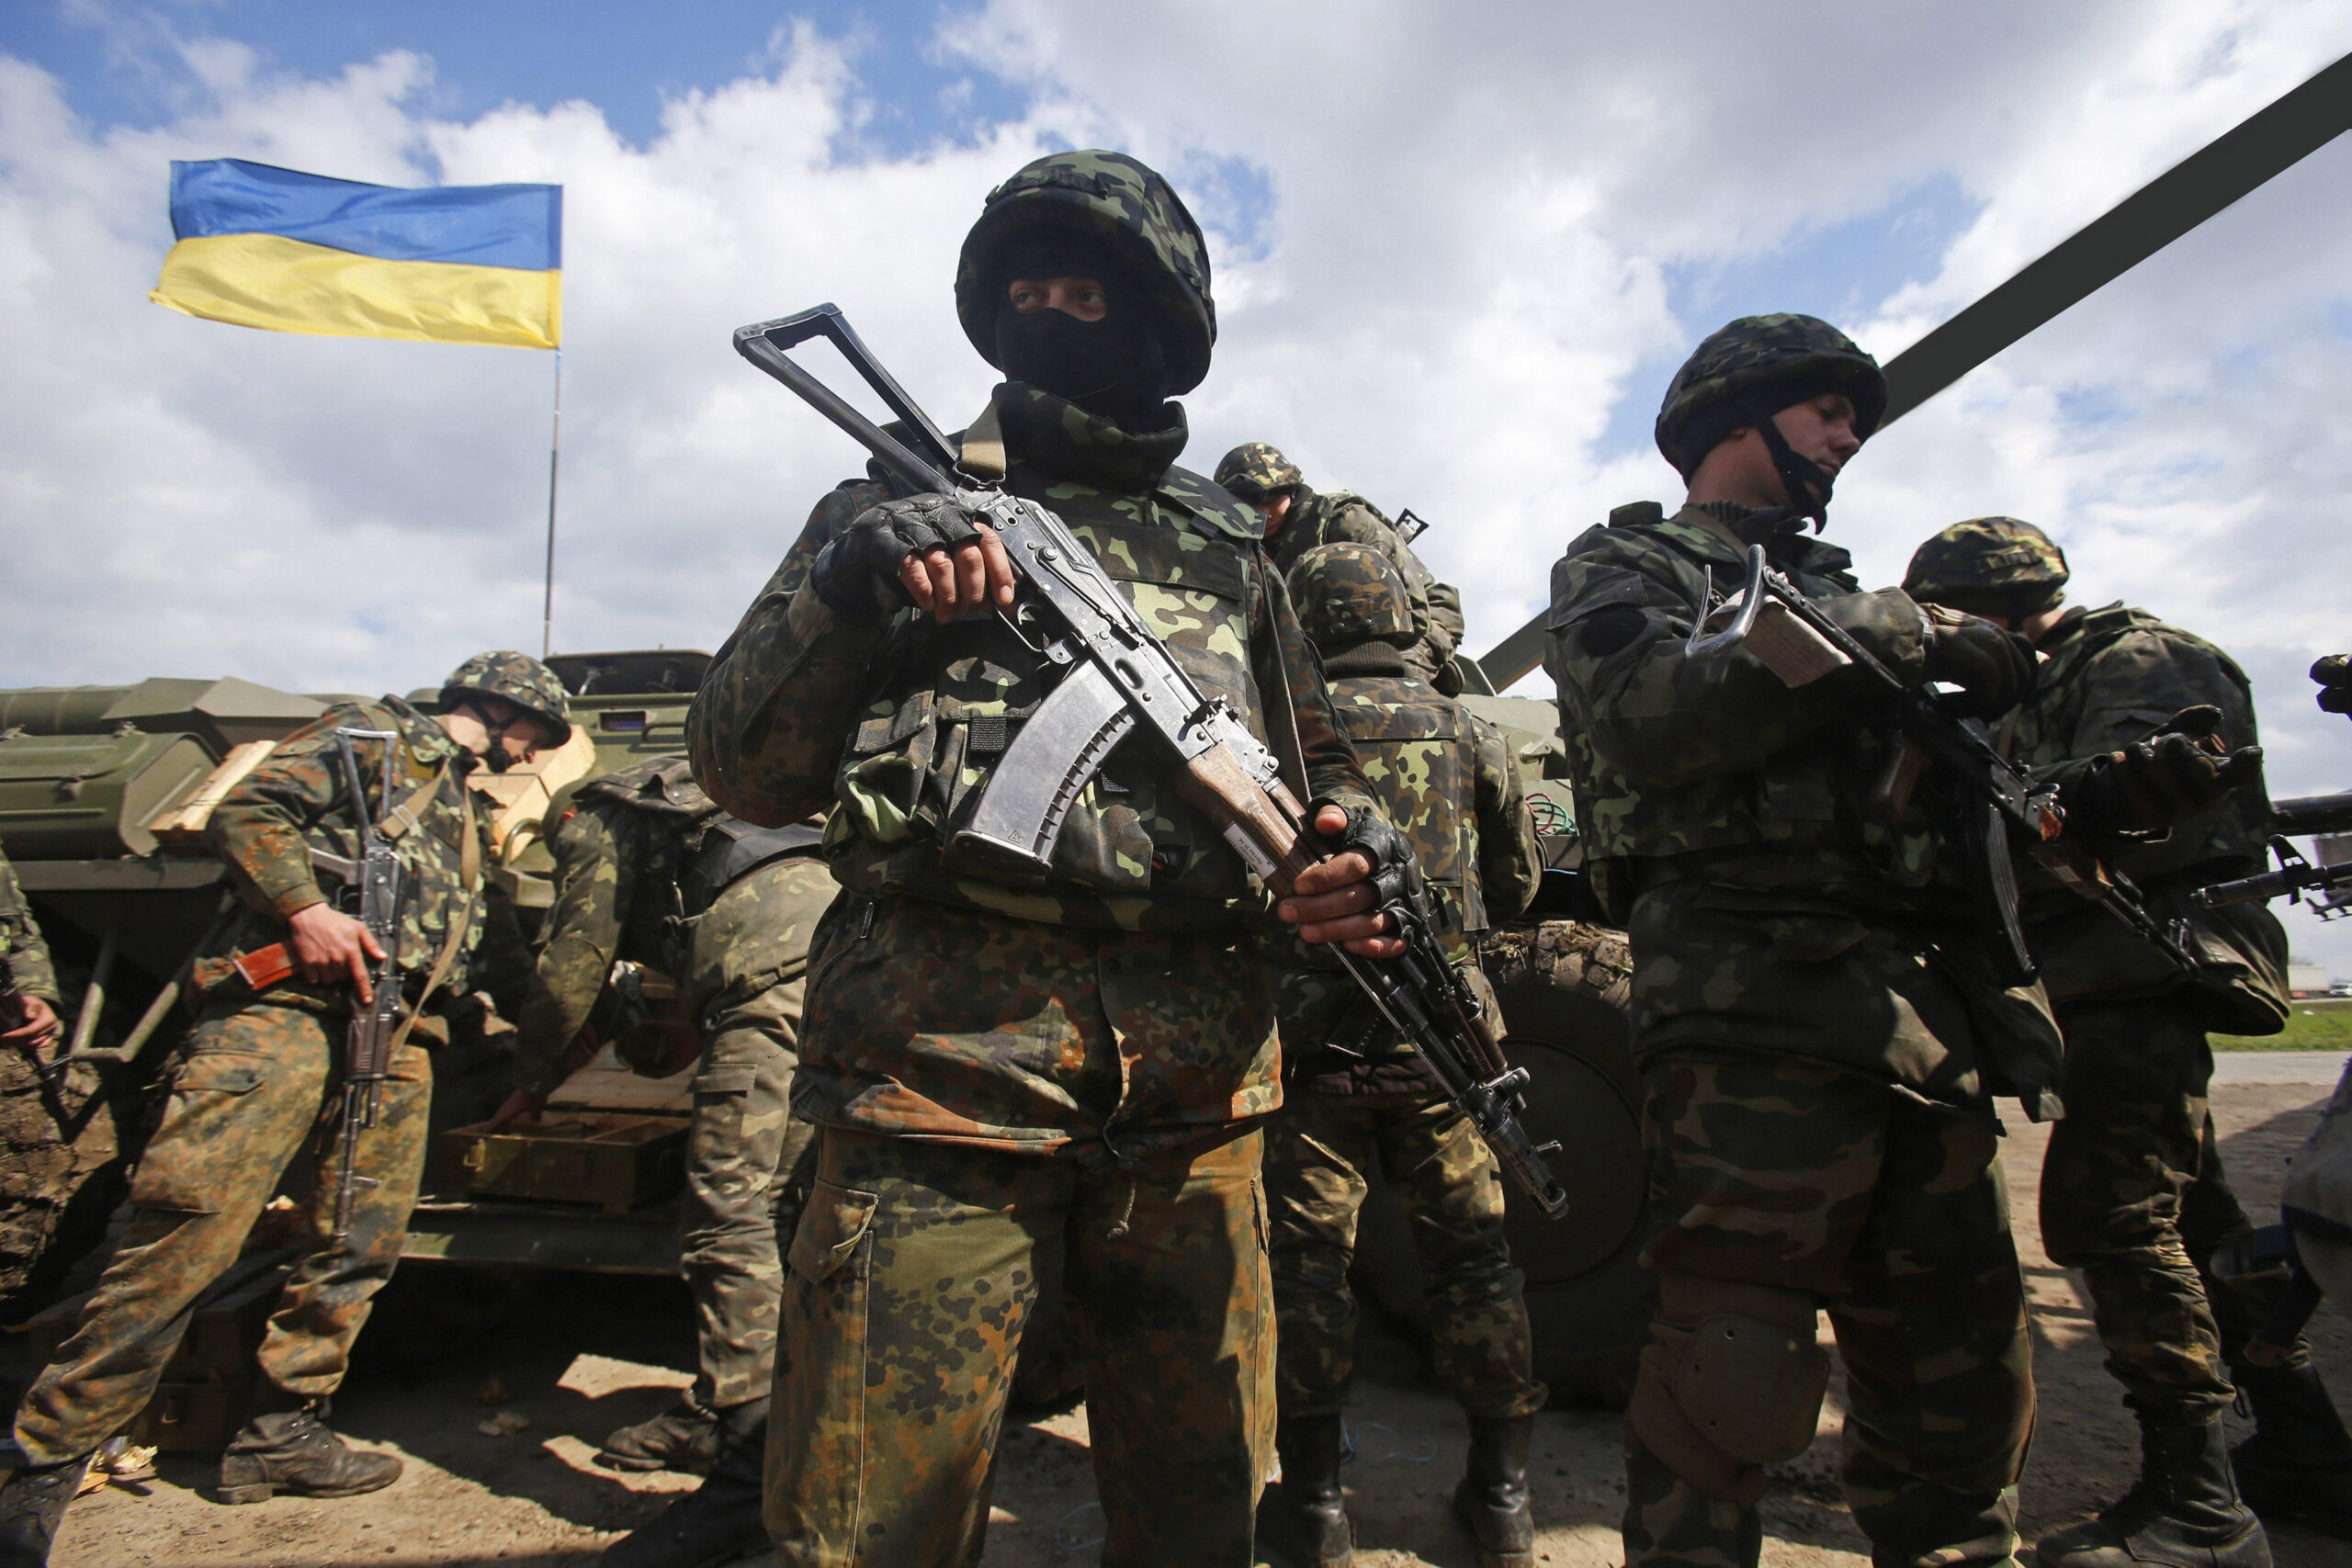 This is a photo of Ukrainian soldiers. They are standing in front of a Ukrainian flag, as it is waving. The soldiers are dressed in military gear, and are holding weapons.